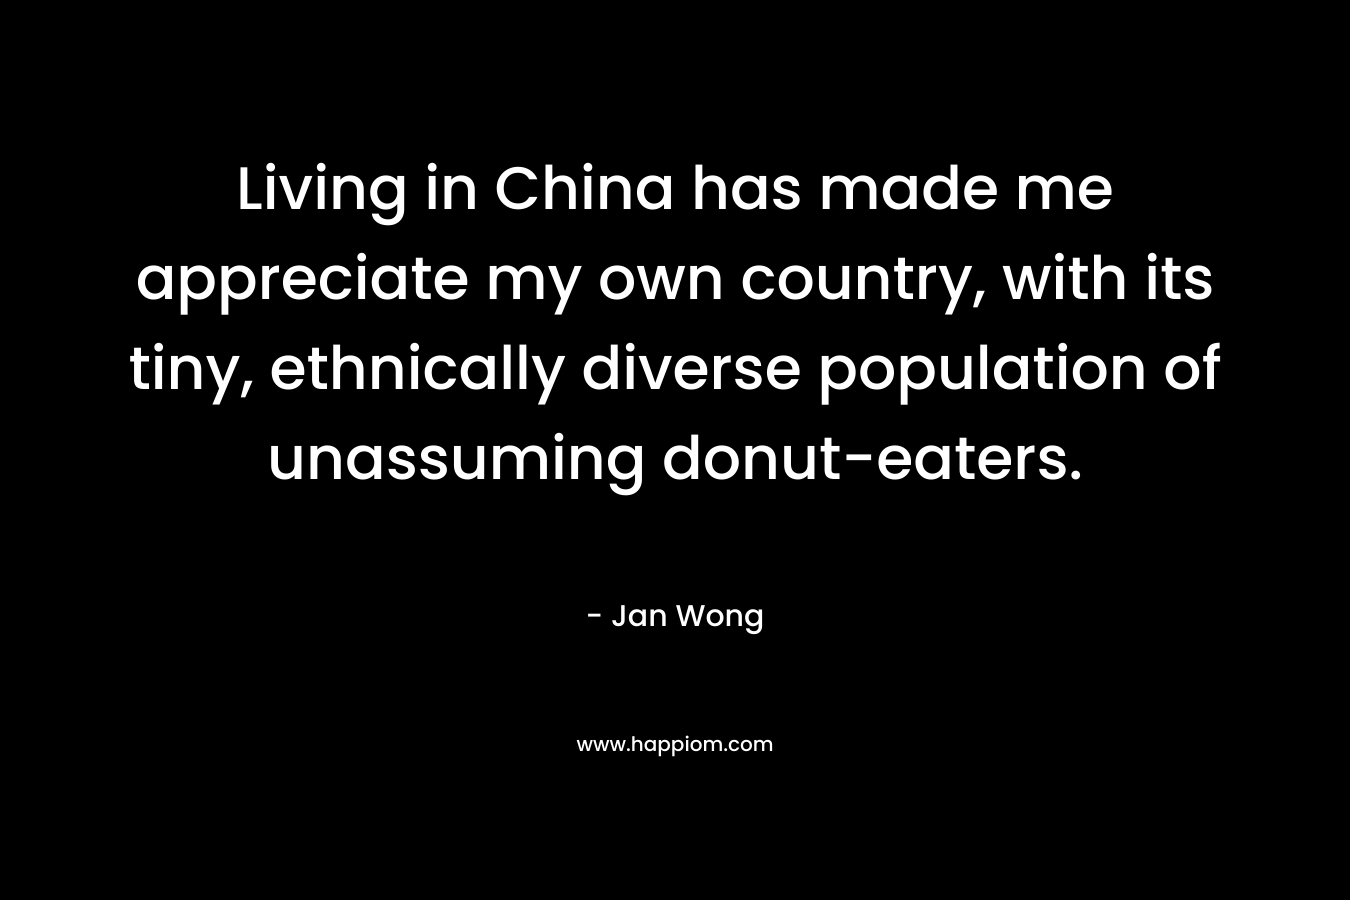 Living in China has made me appreciate my own country, with its tiny, ethnically diverse population of unassuming donut-eaters. – Jan Wong